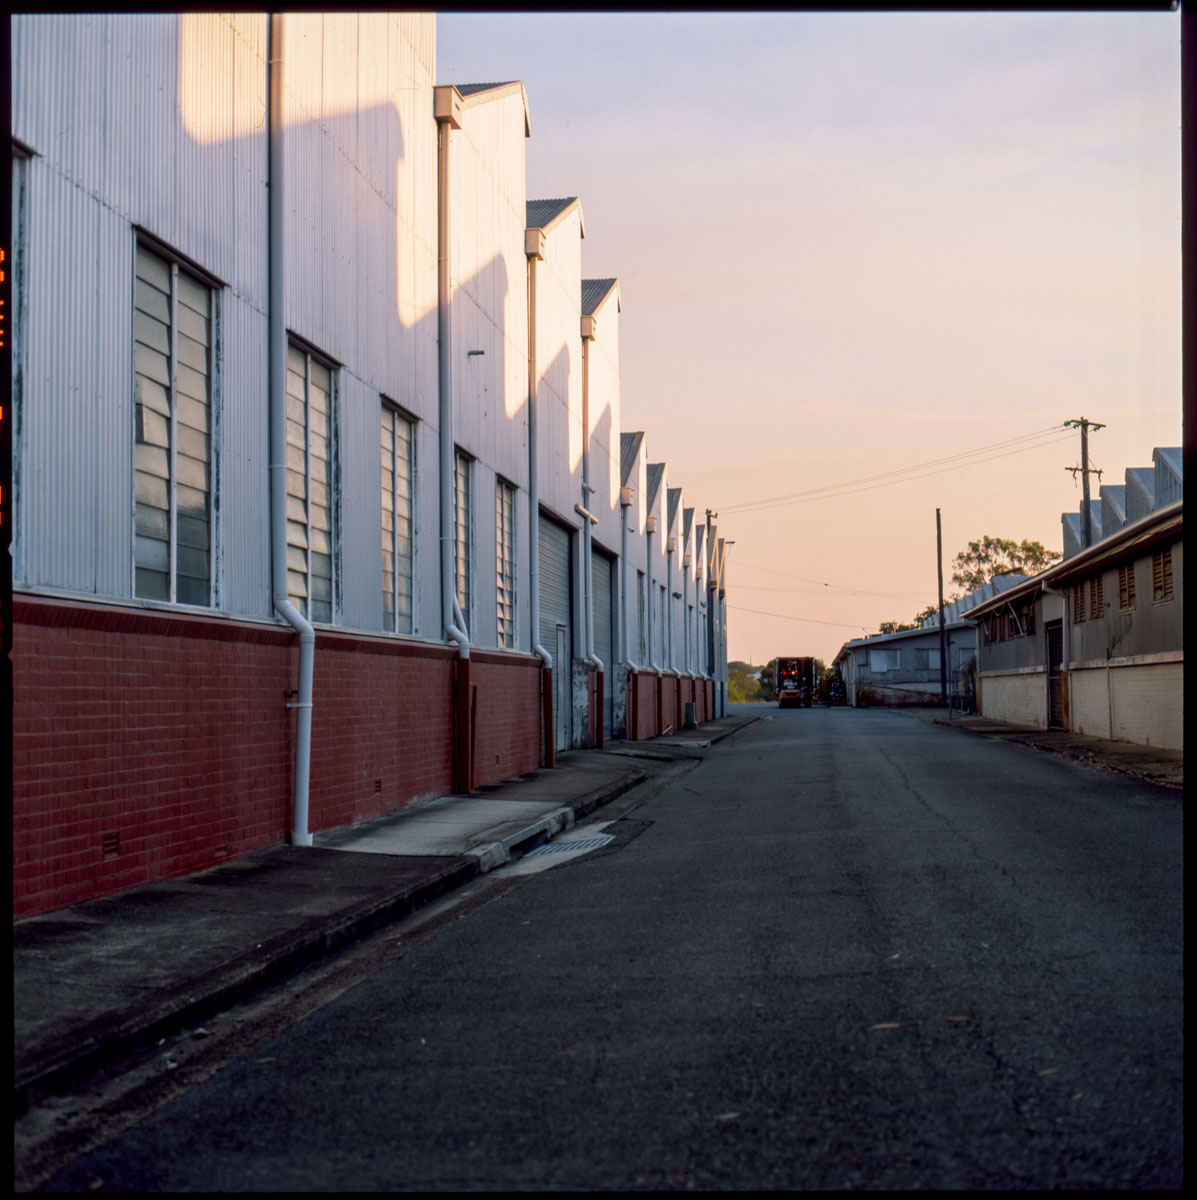 5 Frames... At an abandoned warehouse on Fujifilm Velvia 50 RVP (EI 50 / 120 format / Hasselblad 503CXi) - by Chris Dixon)